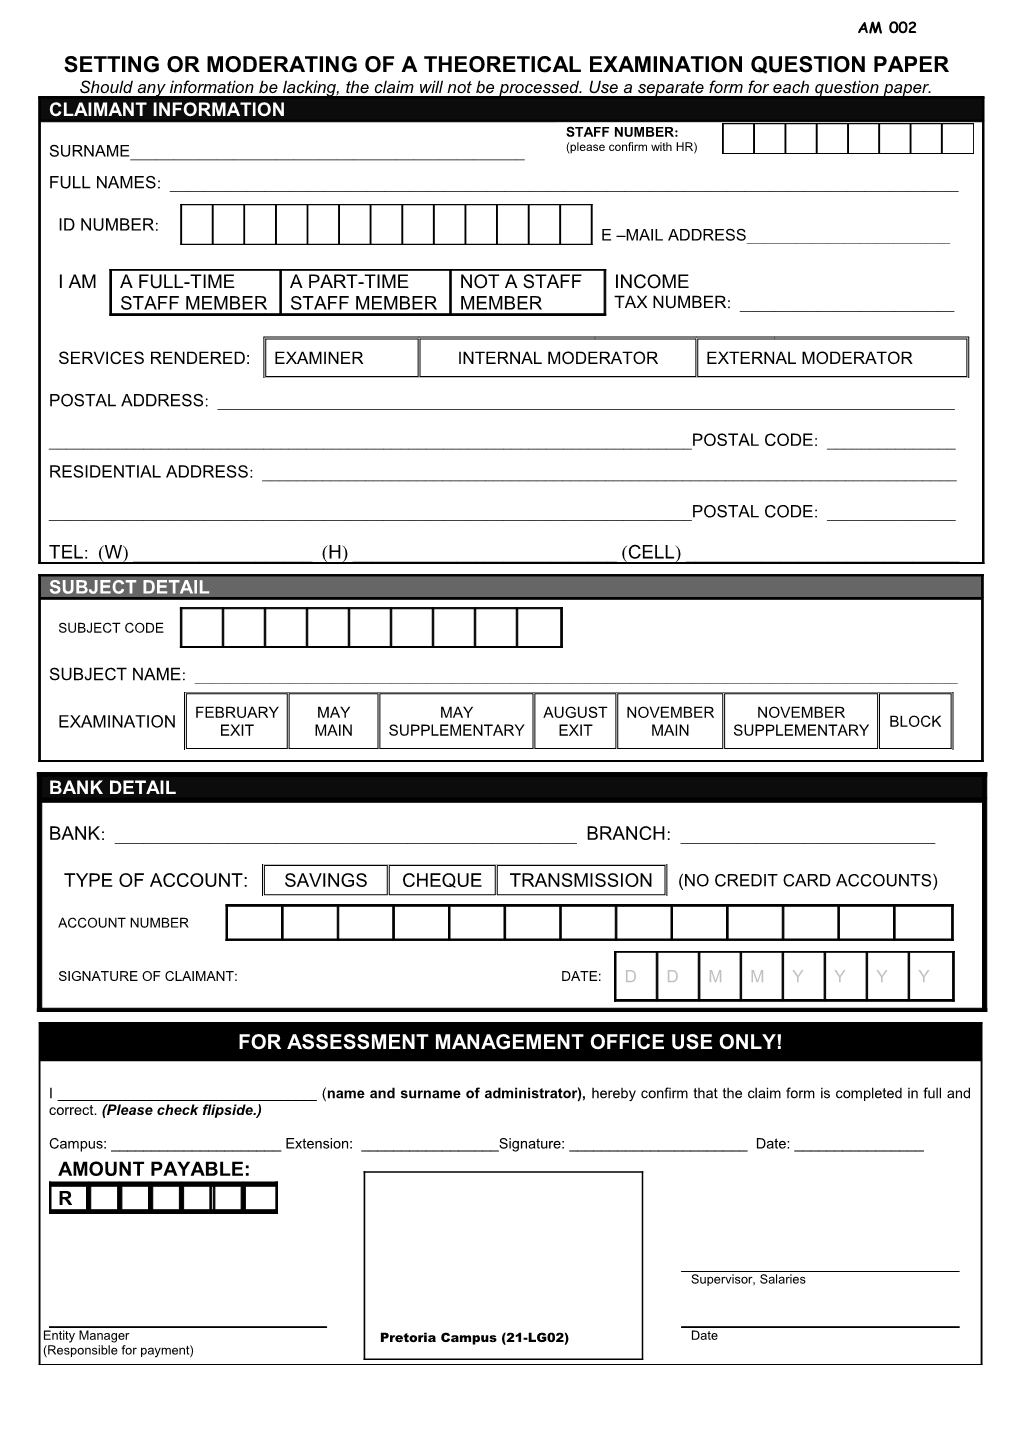 Claim Form for the Setting Or Moderating of a Theoretical Examination Question Paper